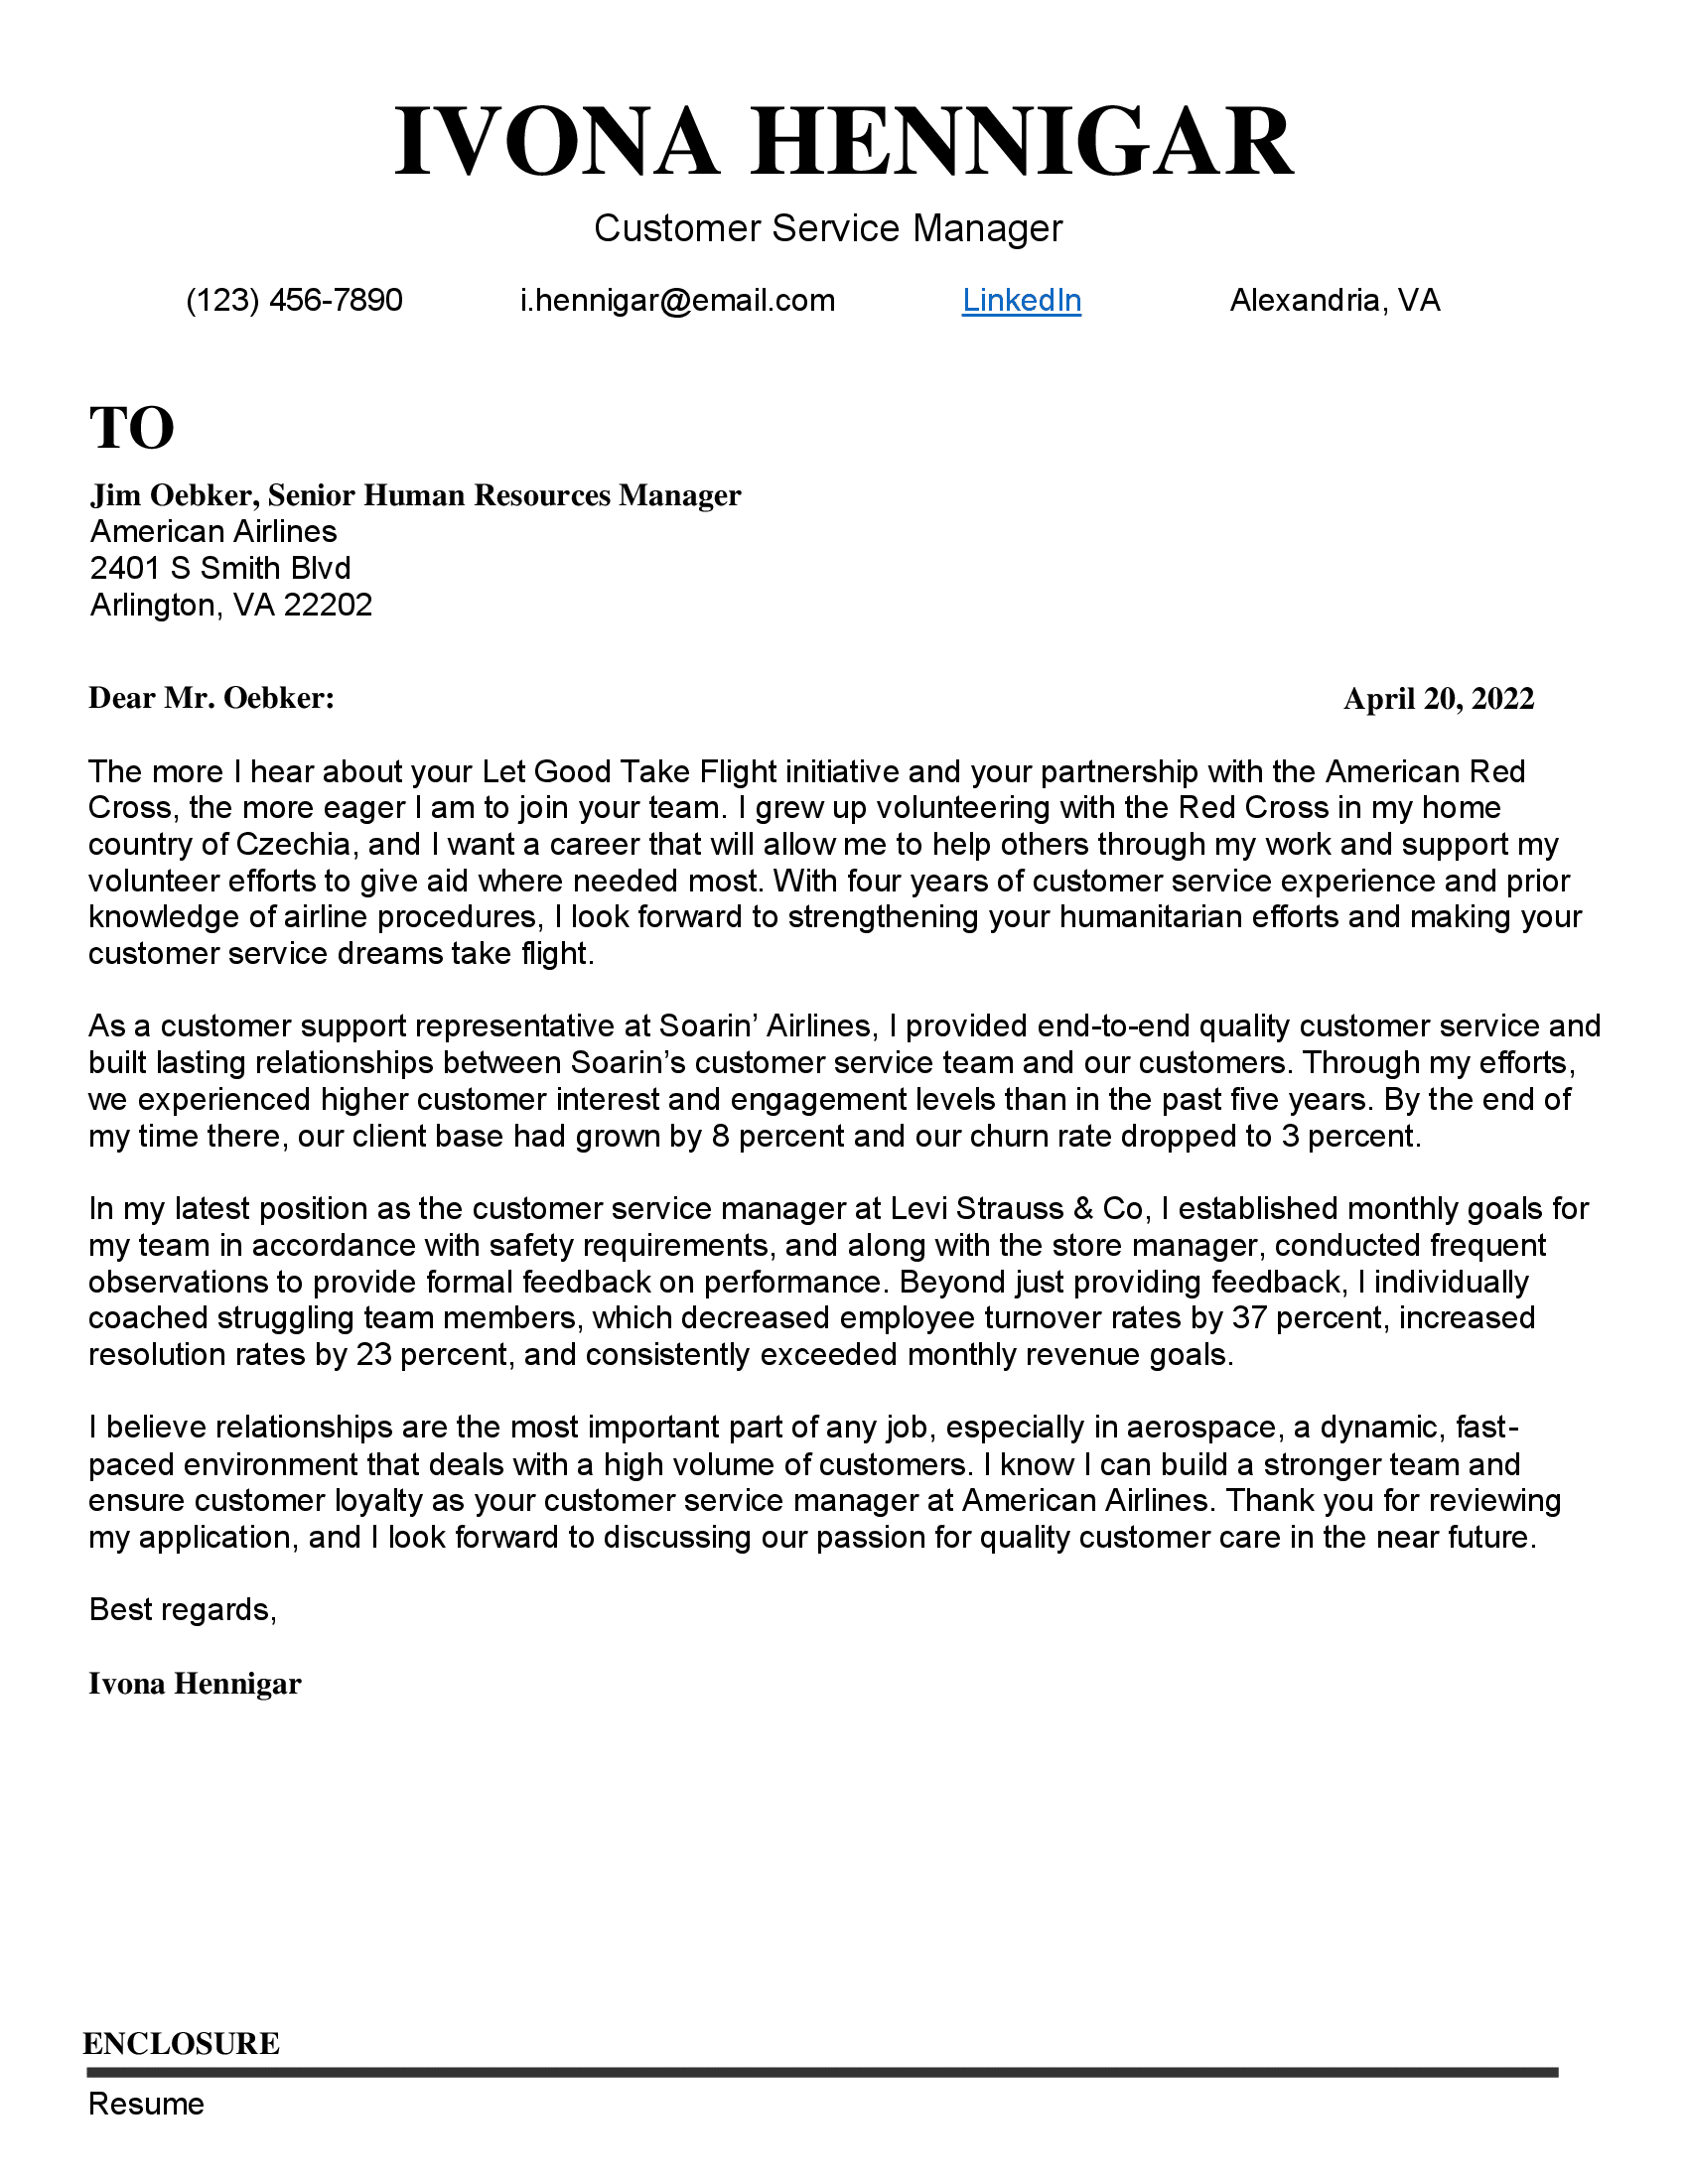 Customer service manager cover letter